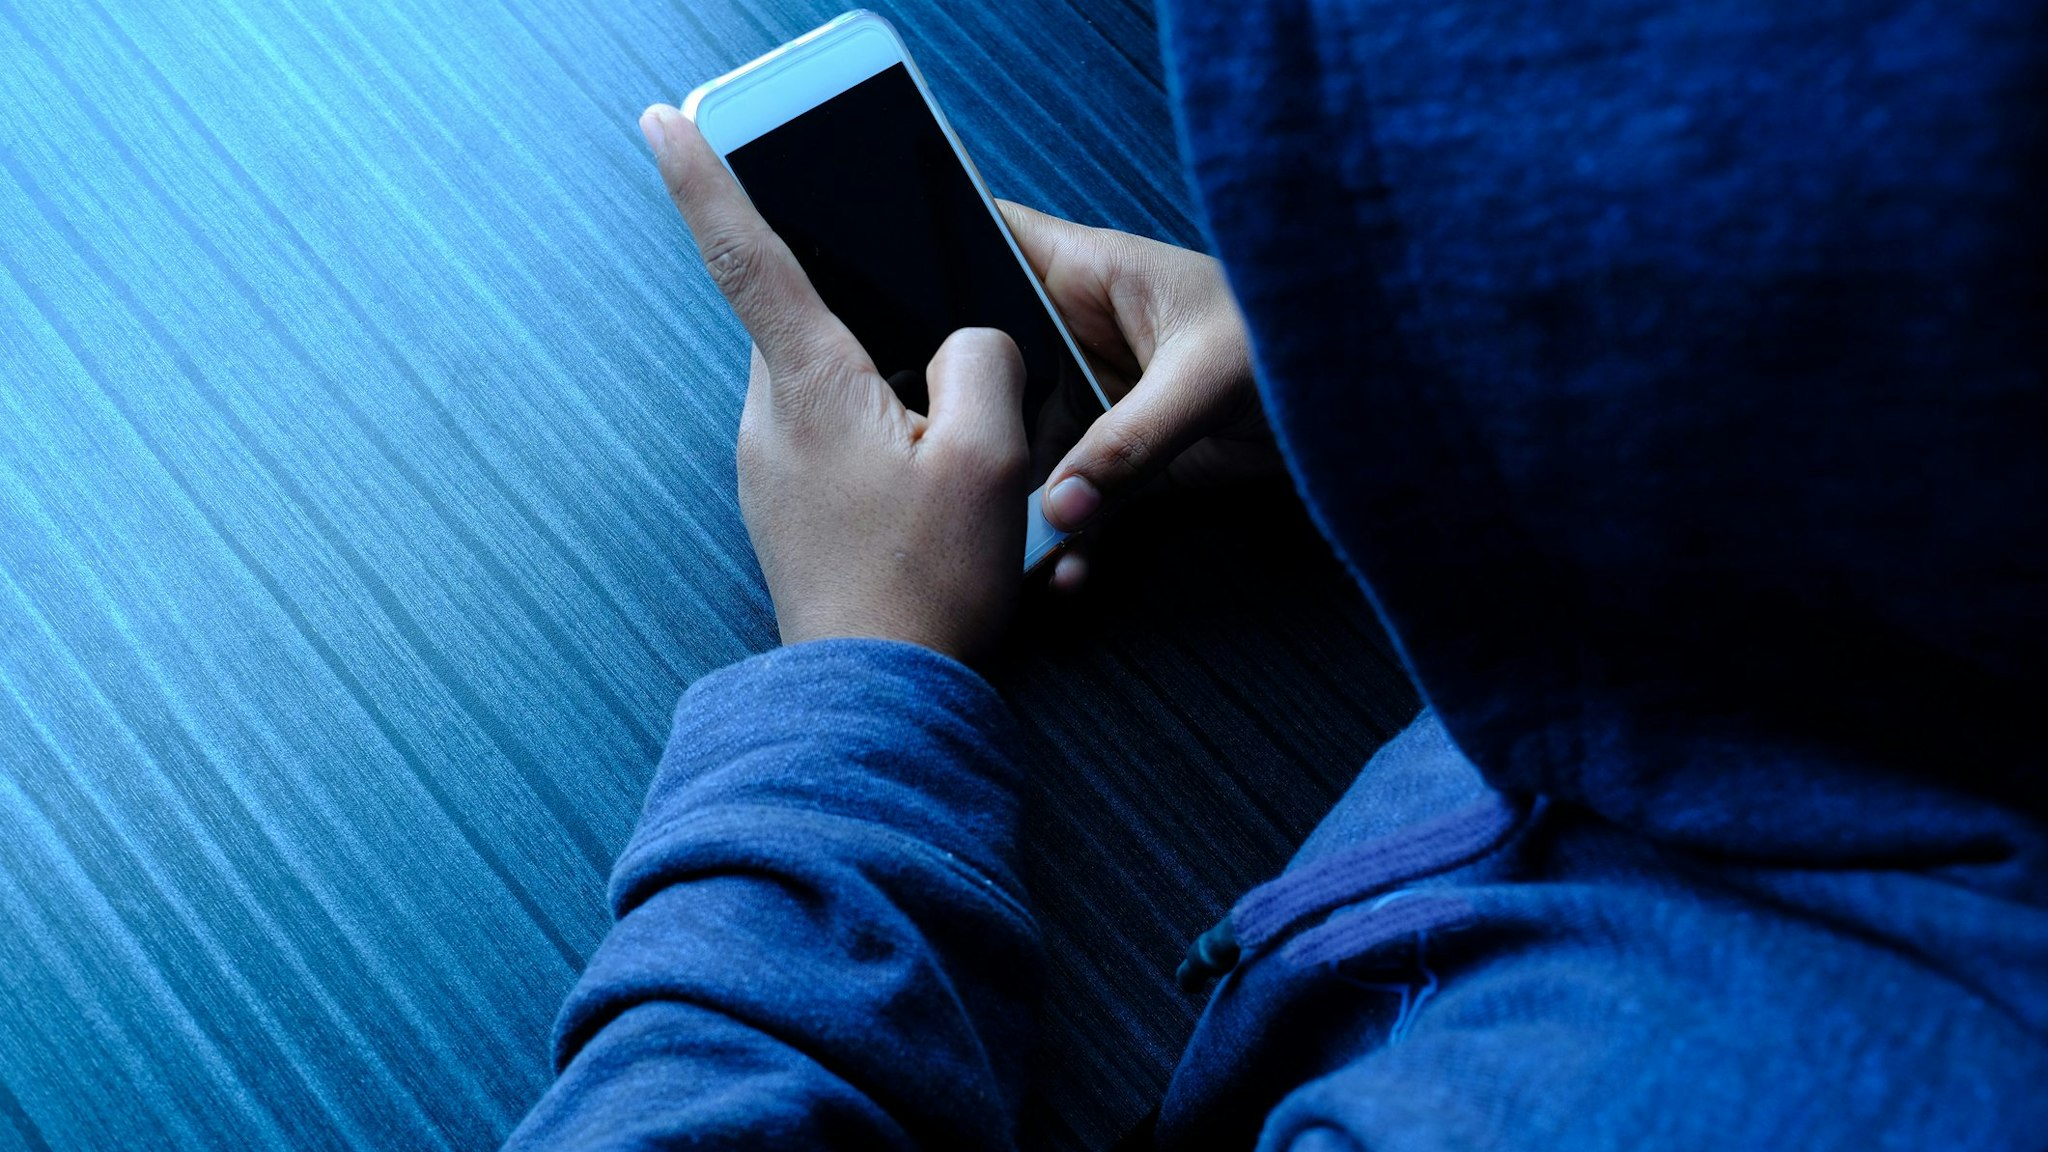 hooded cyber hacker stealing personal data using phone